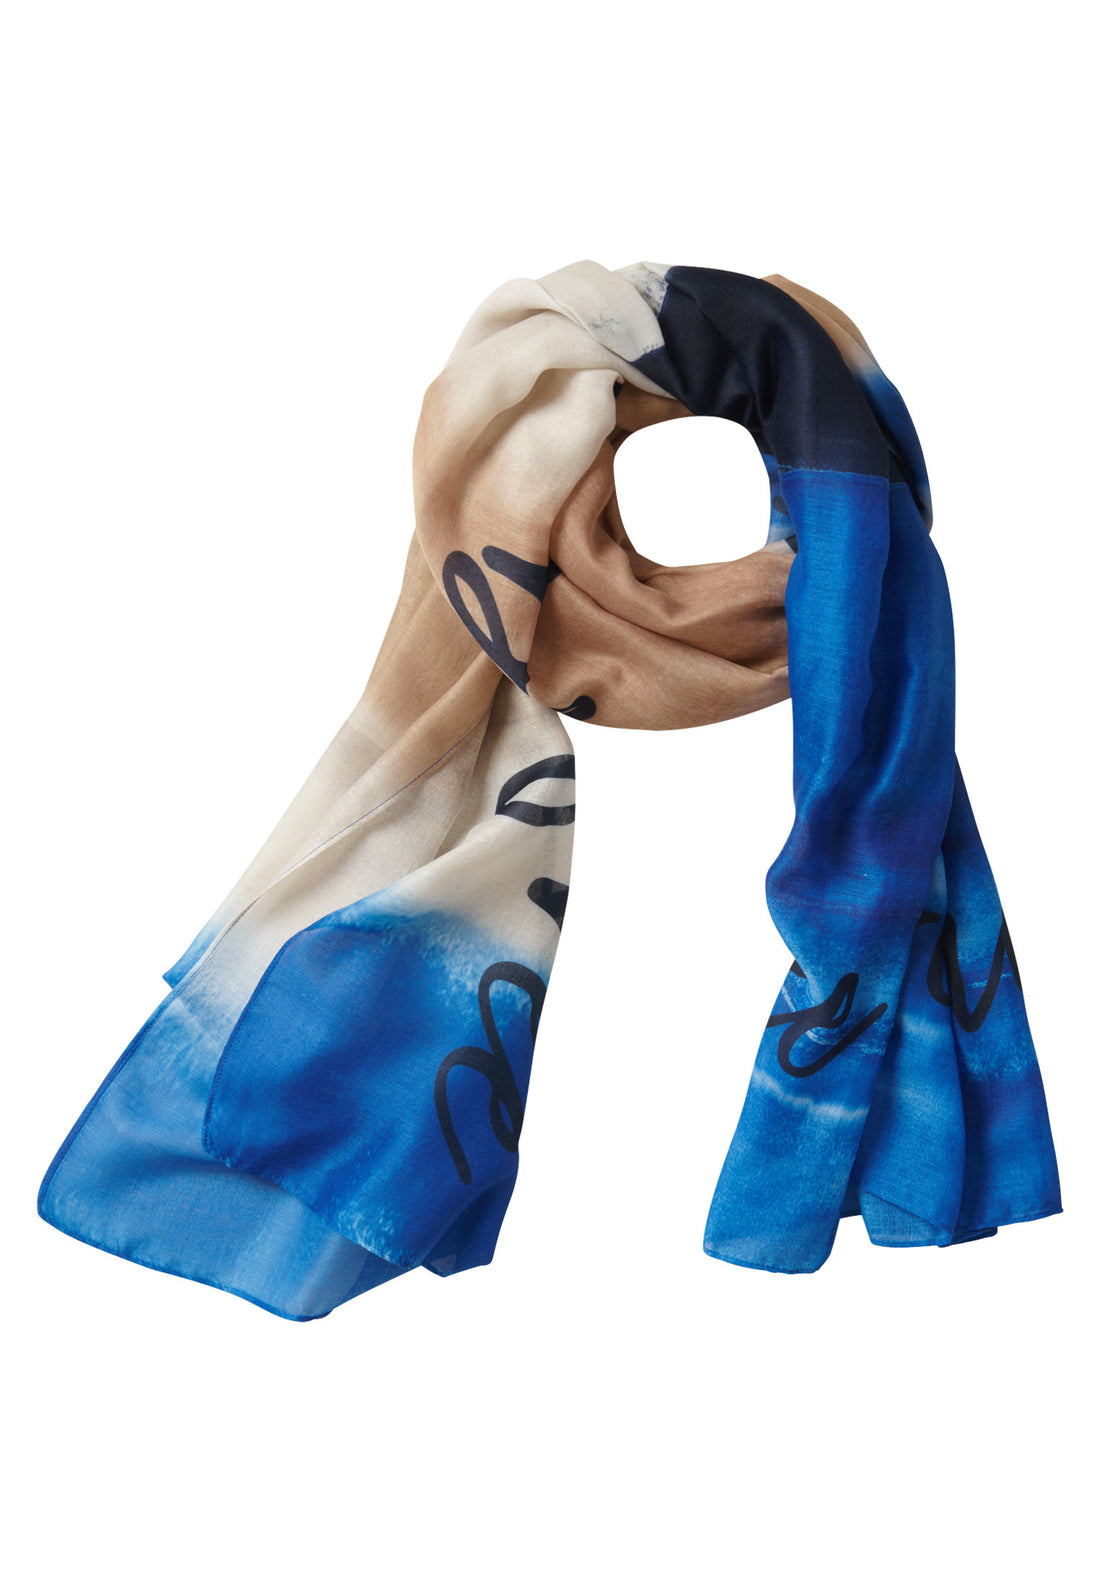 Scarf With All-Over Print_3375-2272_7886_01